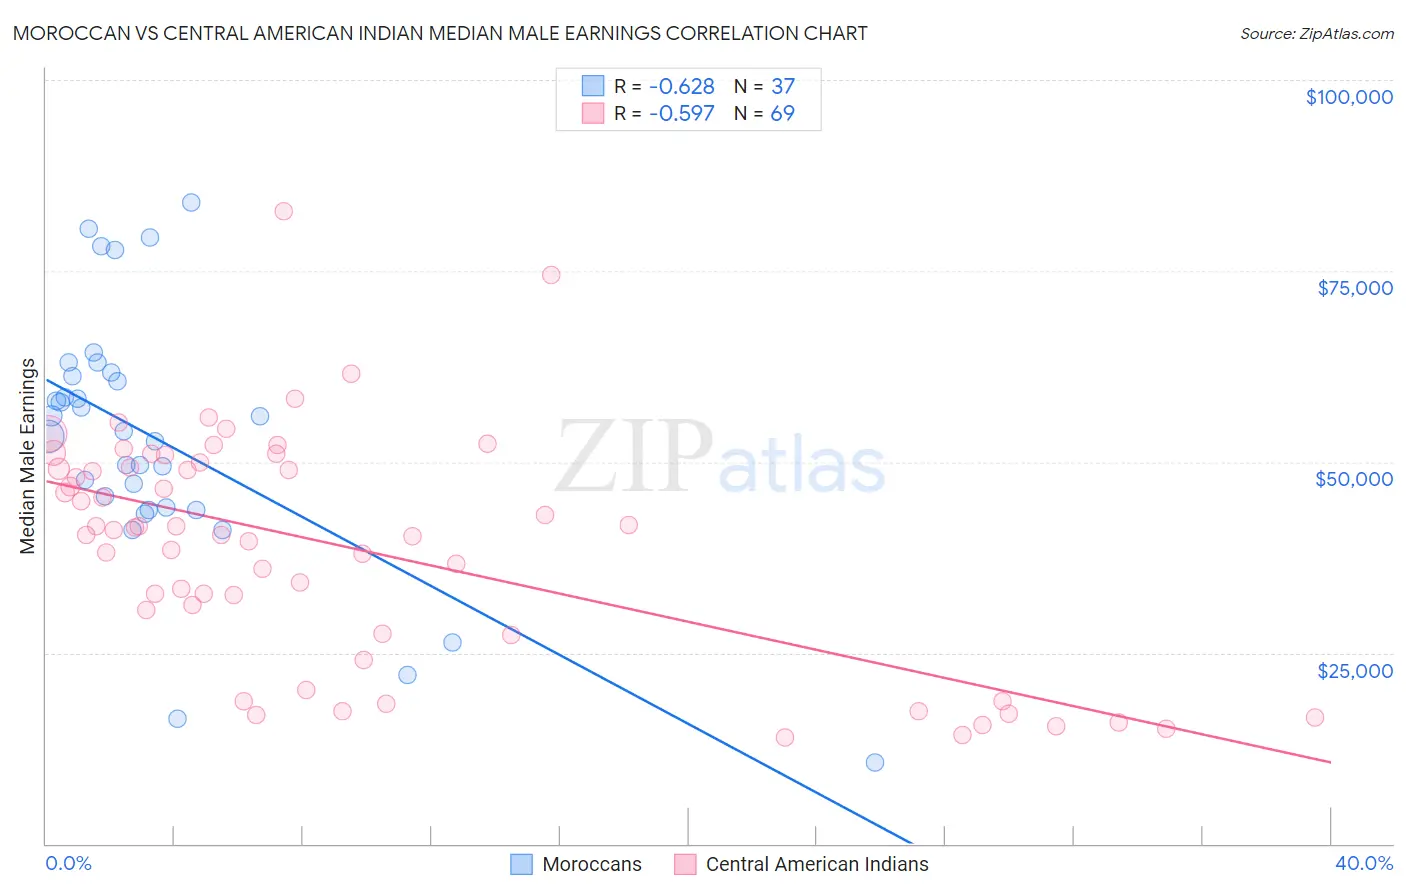 Moroccan vs Central American Indian Median Male Earnings